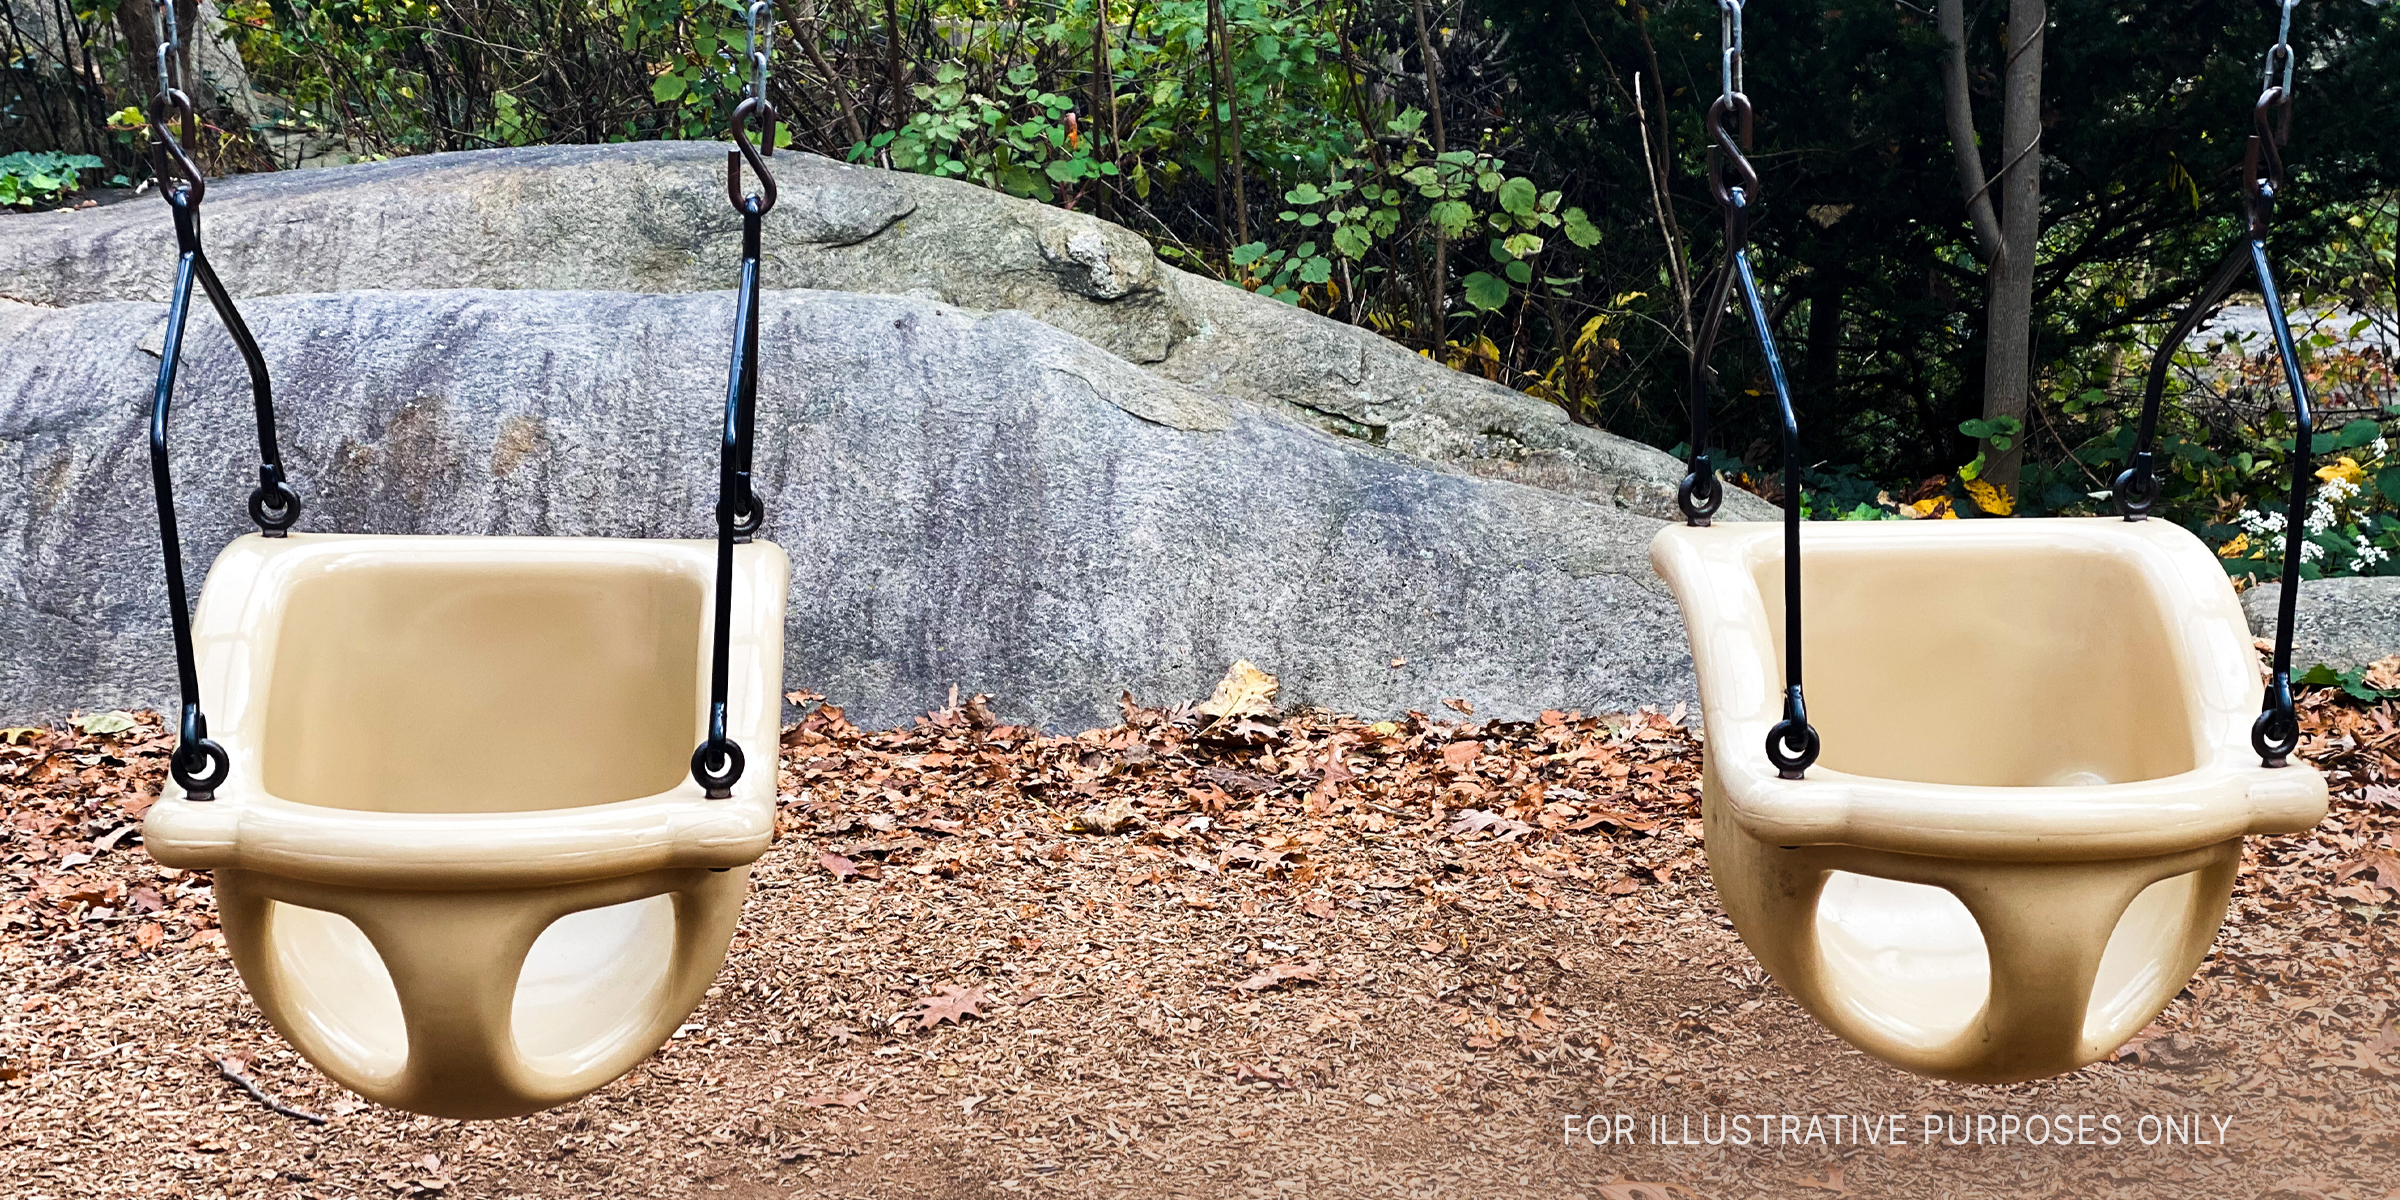 Two empty swings | Source: Getty Images